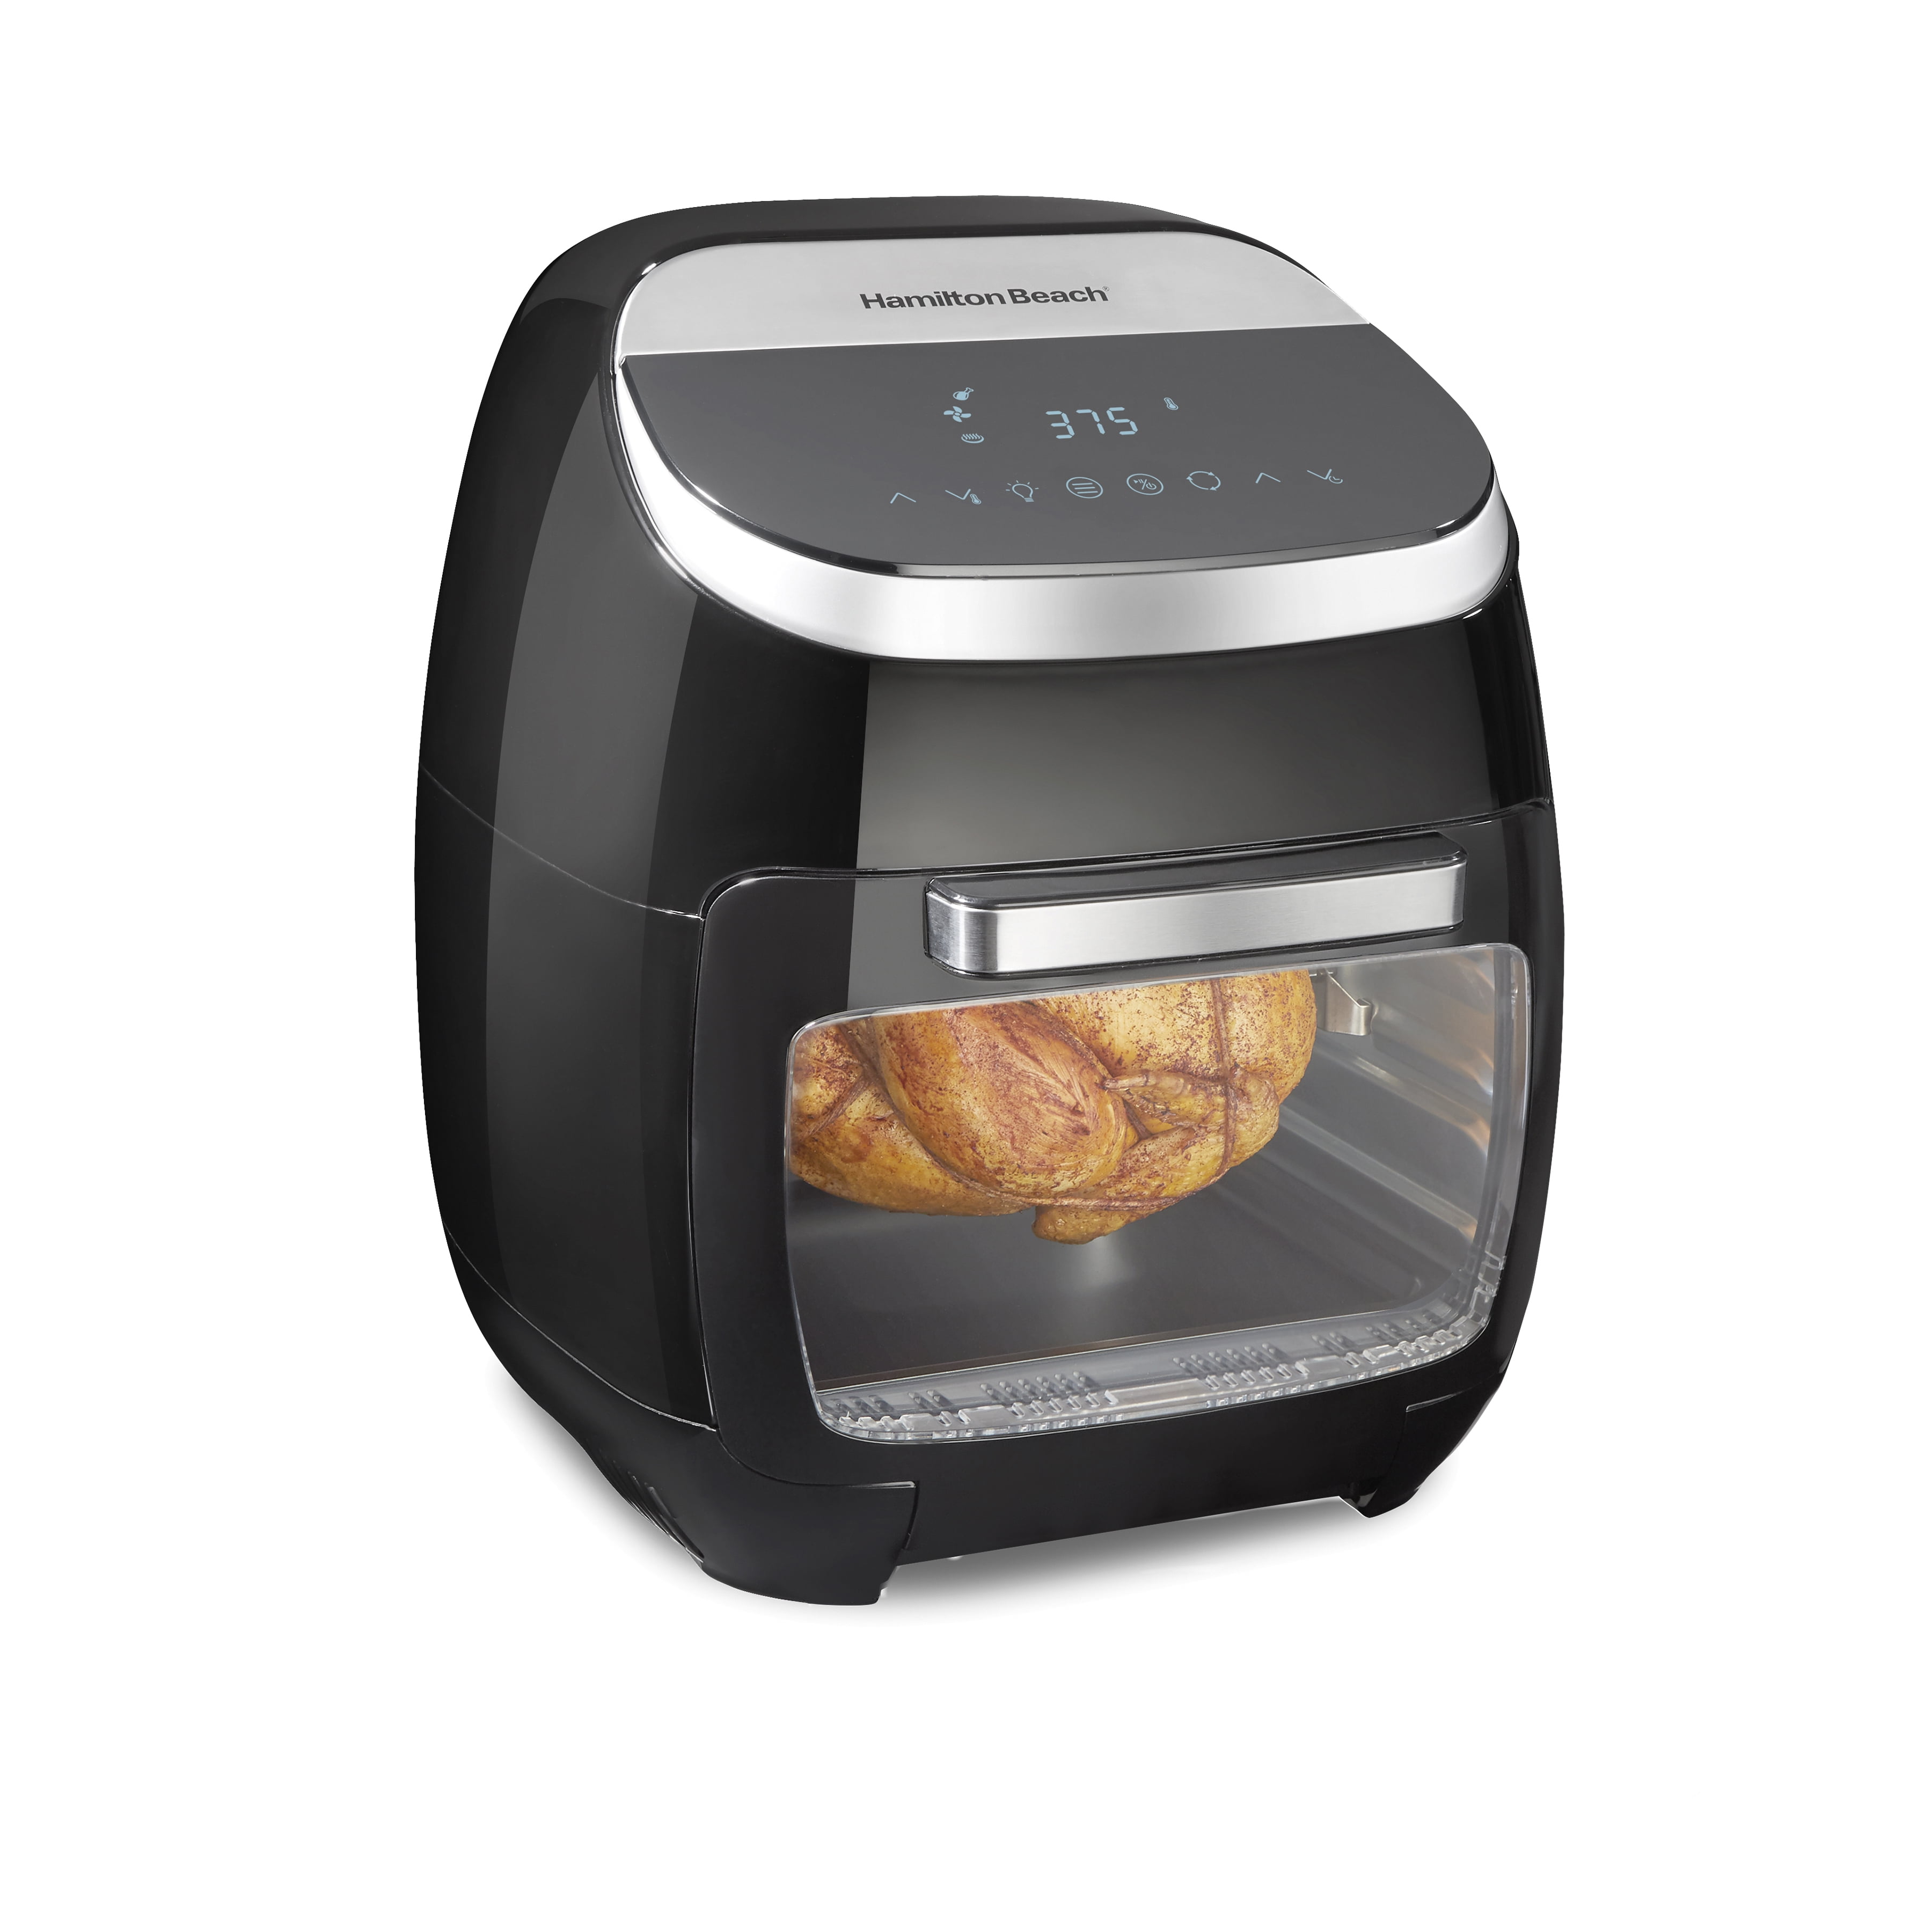 Hamilton Beach 11 Liter Air Fryer Oven with Rotisserie and Rotating Basket